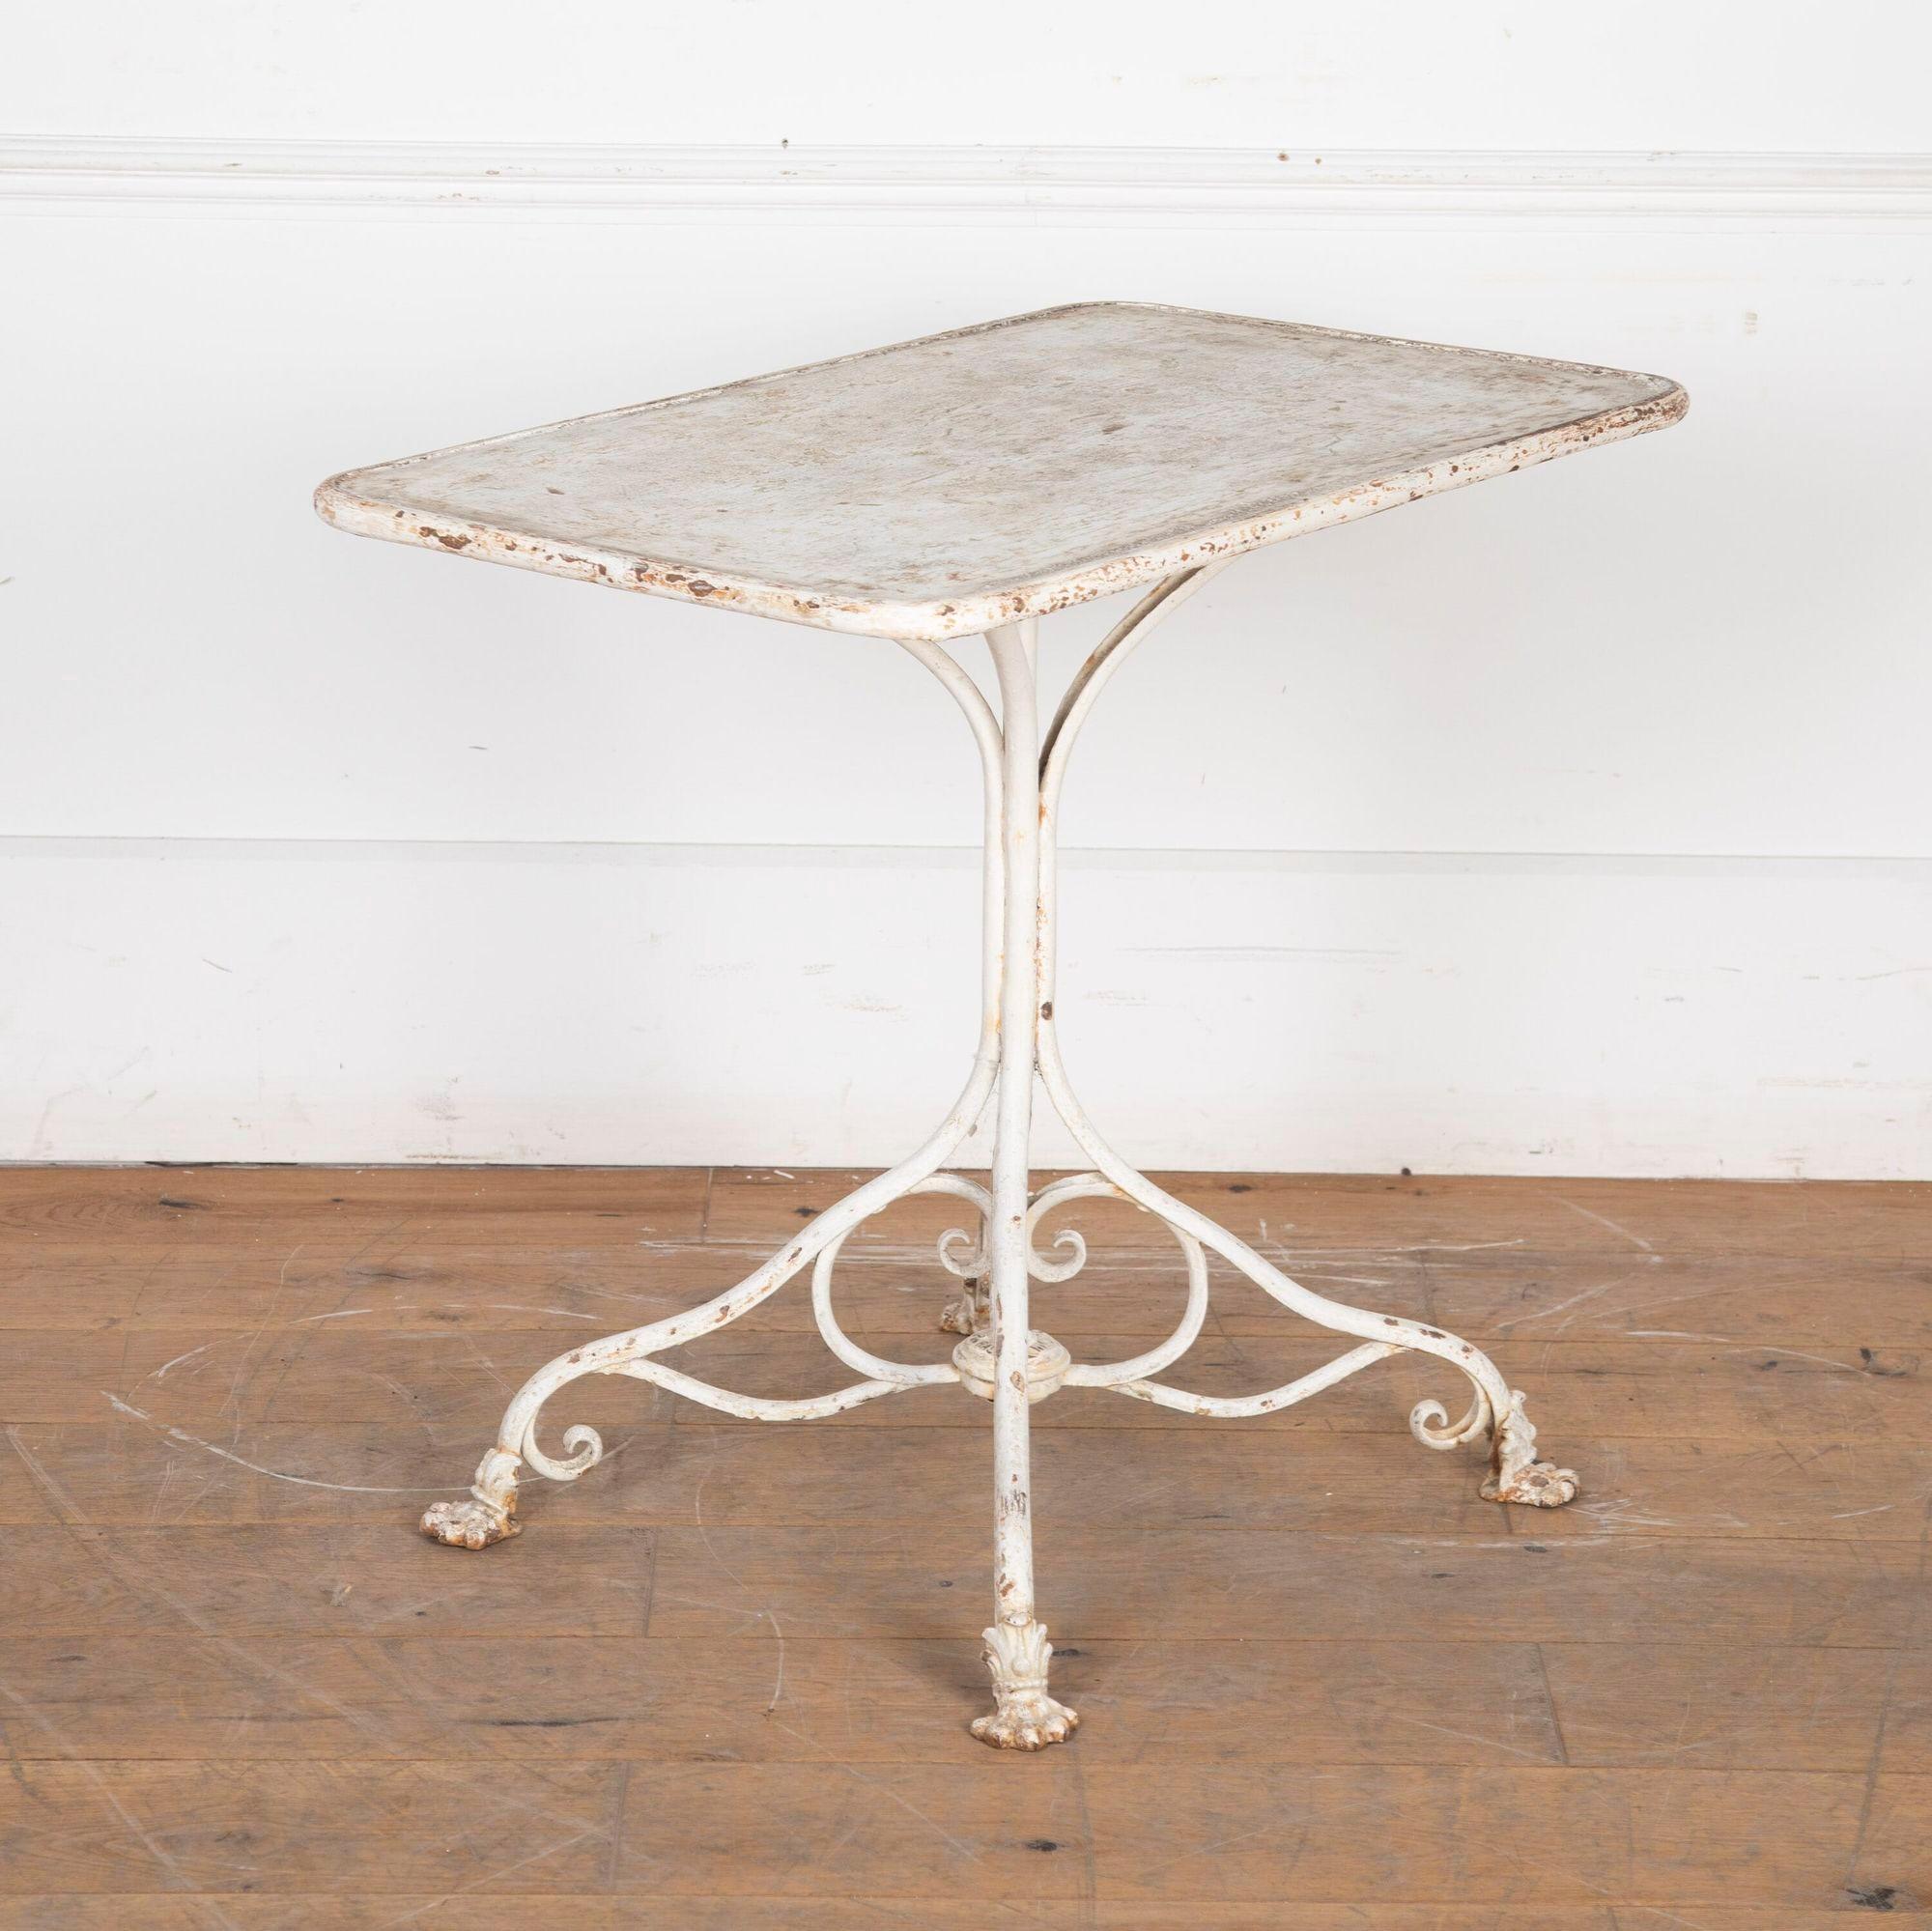 Wonderful 19th Century French Arras garden table.
This fantastic example features a very decoratively scrolled wrought iron pedestal with large paw feet and an Arras stamp. The northern town of Arras was famous for its iron foundries, which produced